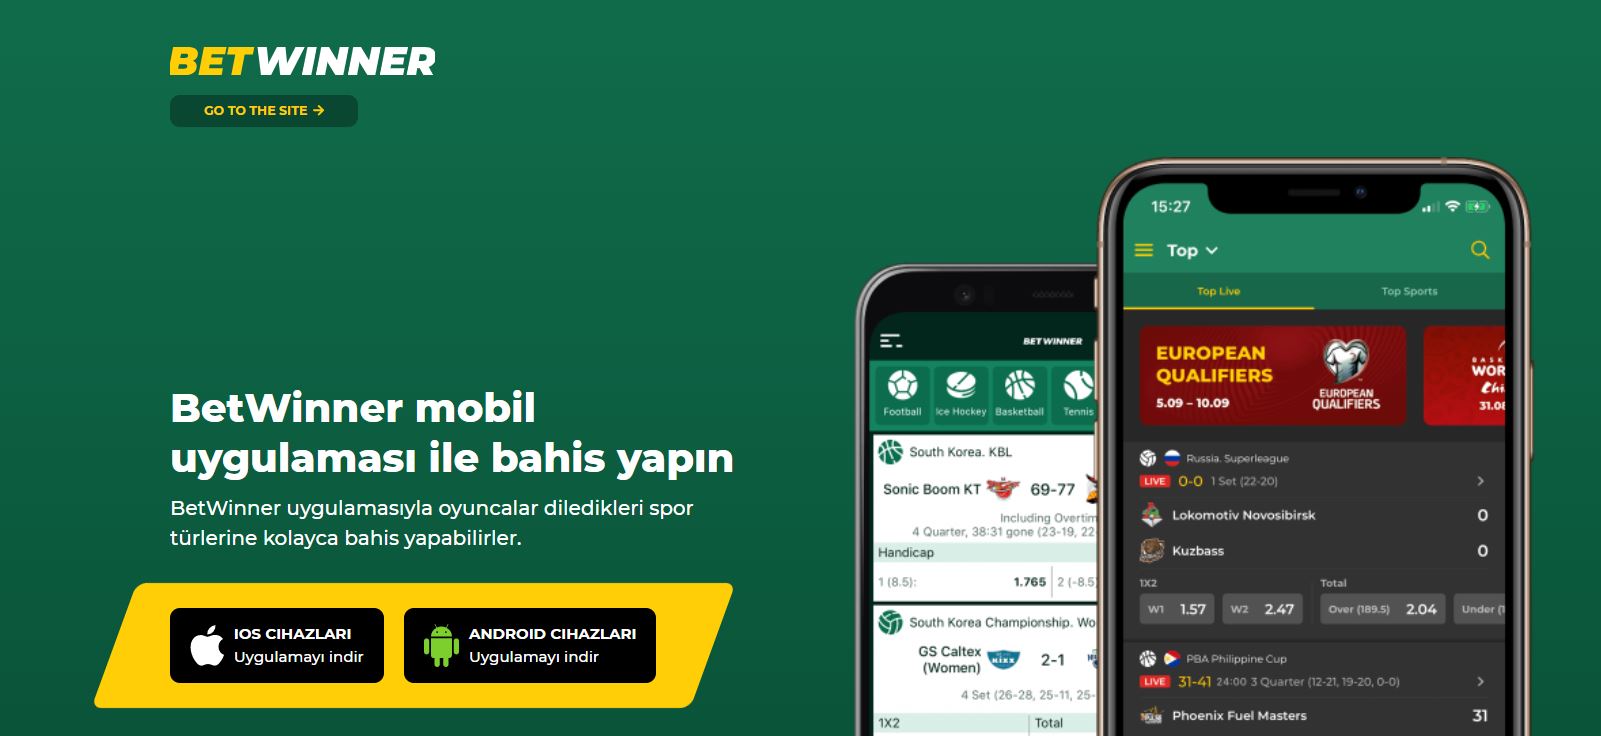 Need More Inspiration With Betwinner APK? Read this!